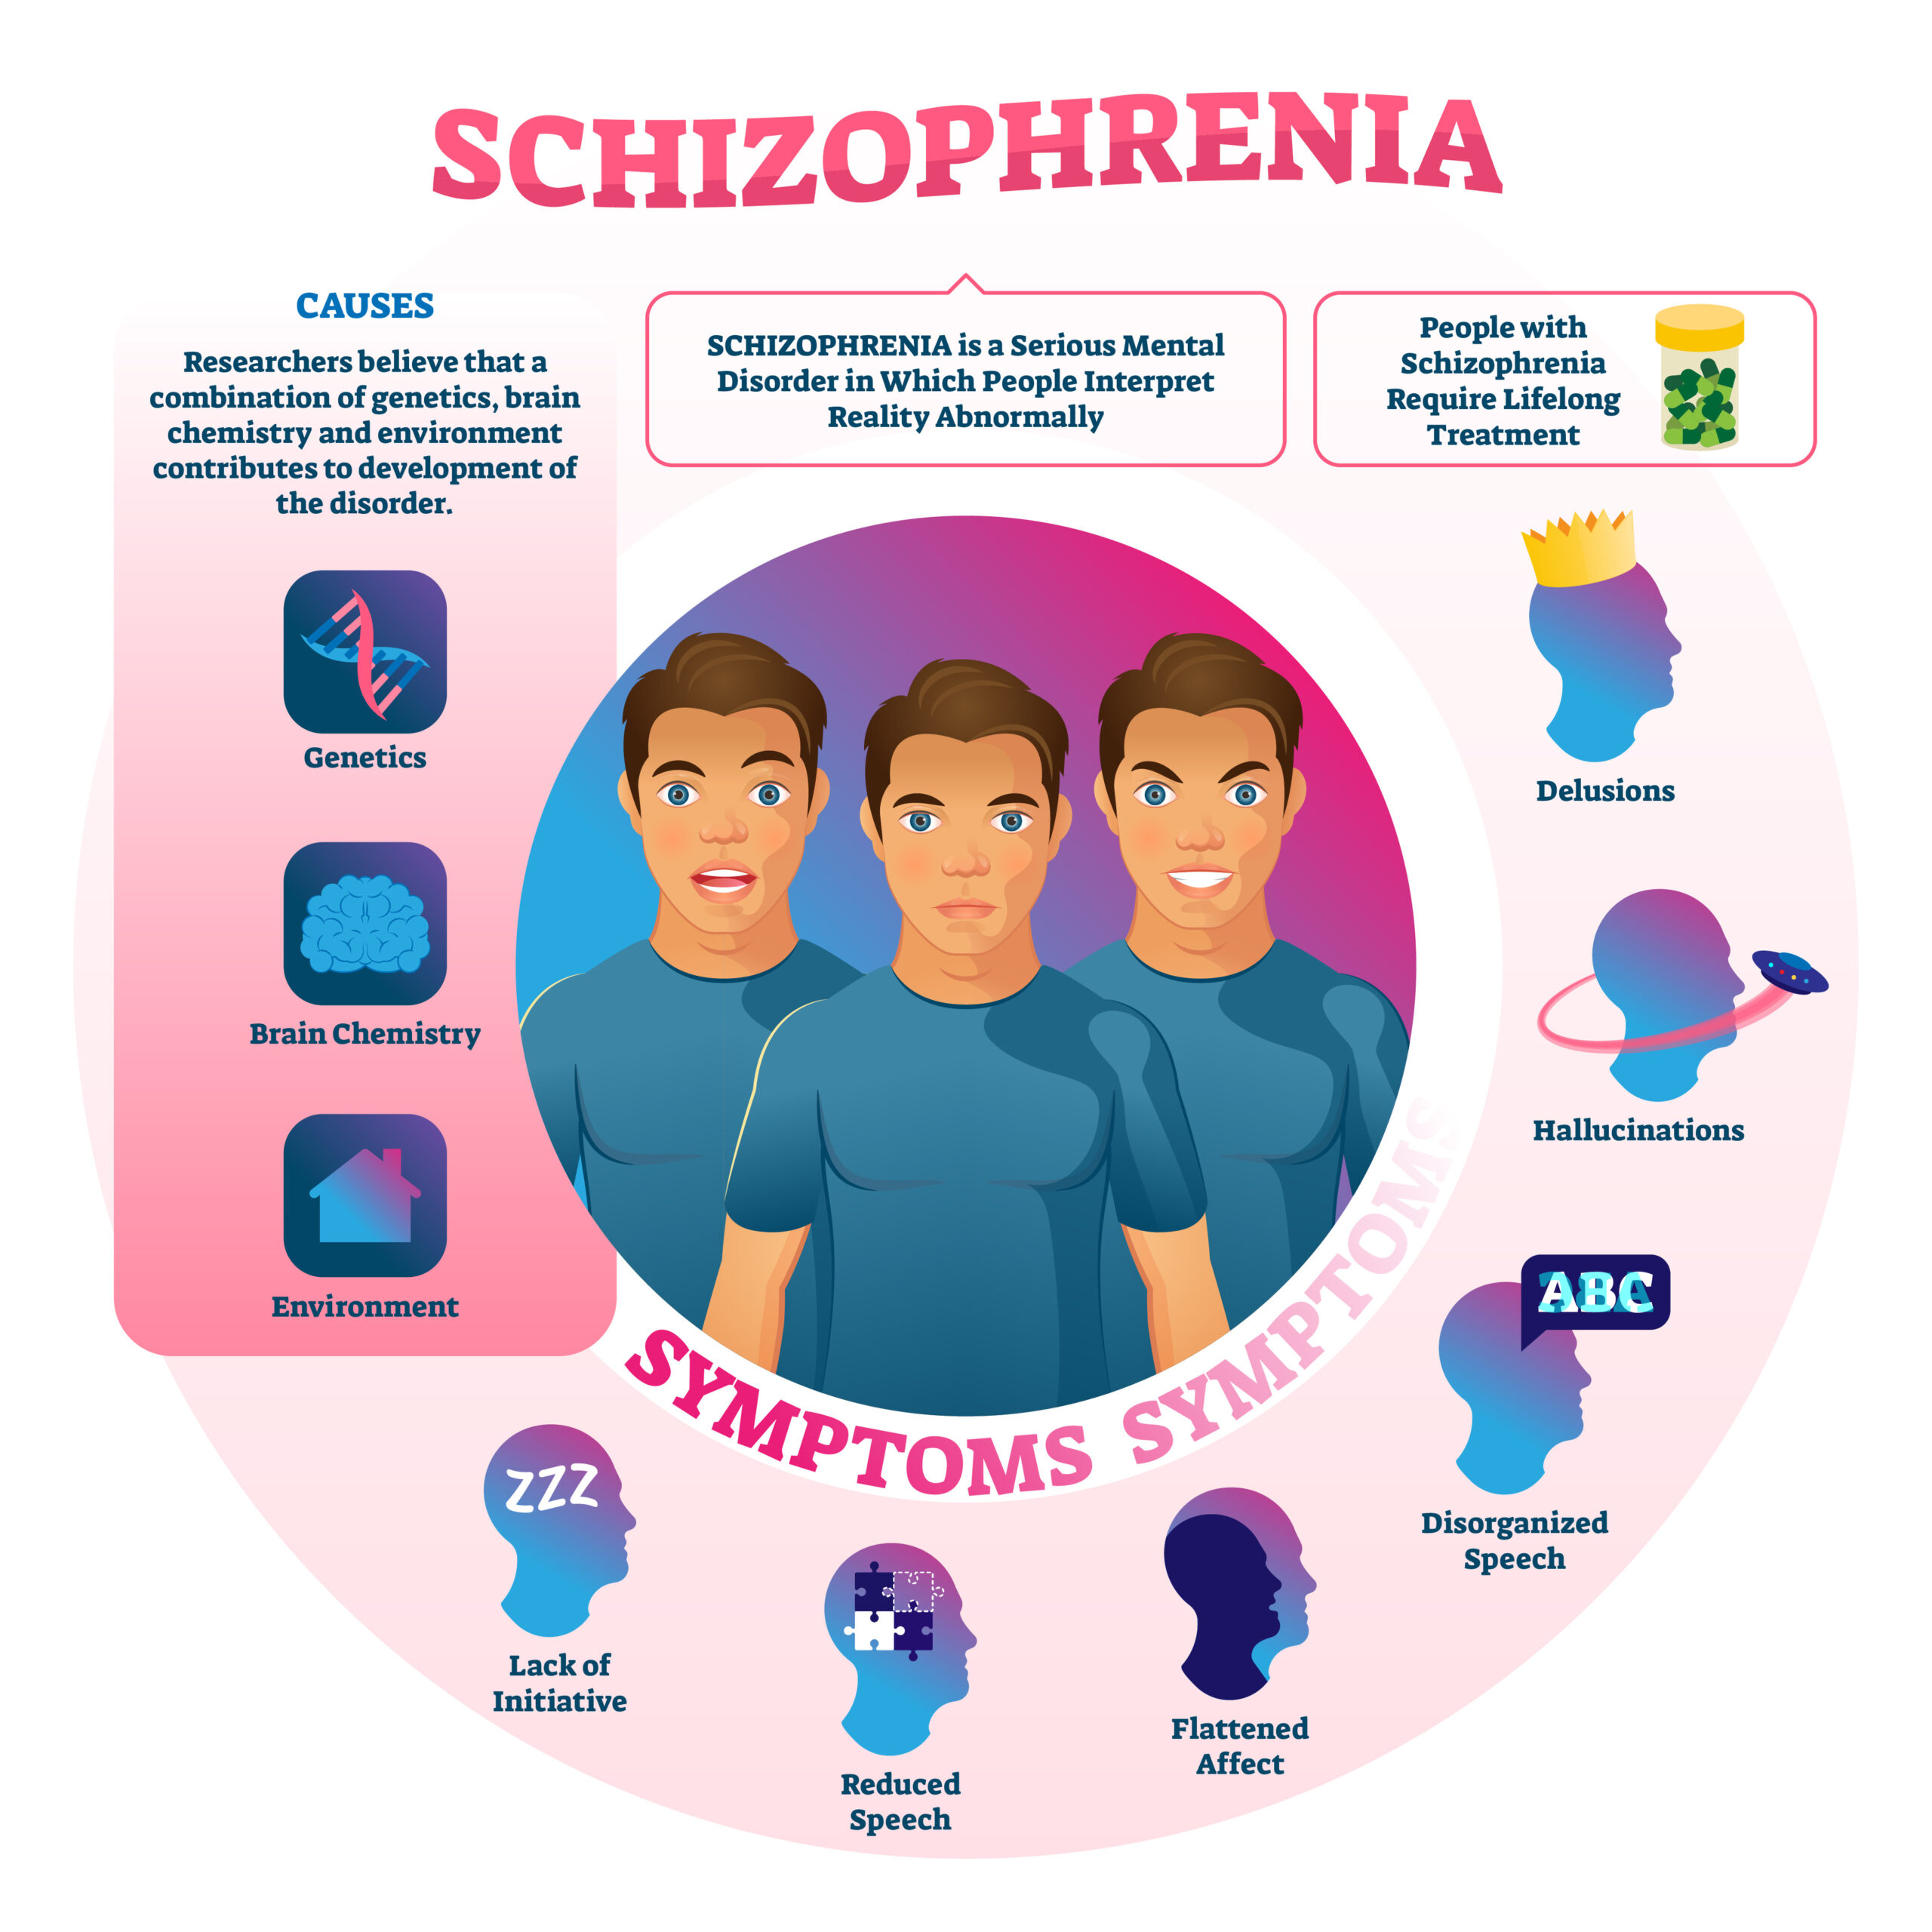 Illustration showing symptoms and causes of schizophrenia.